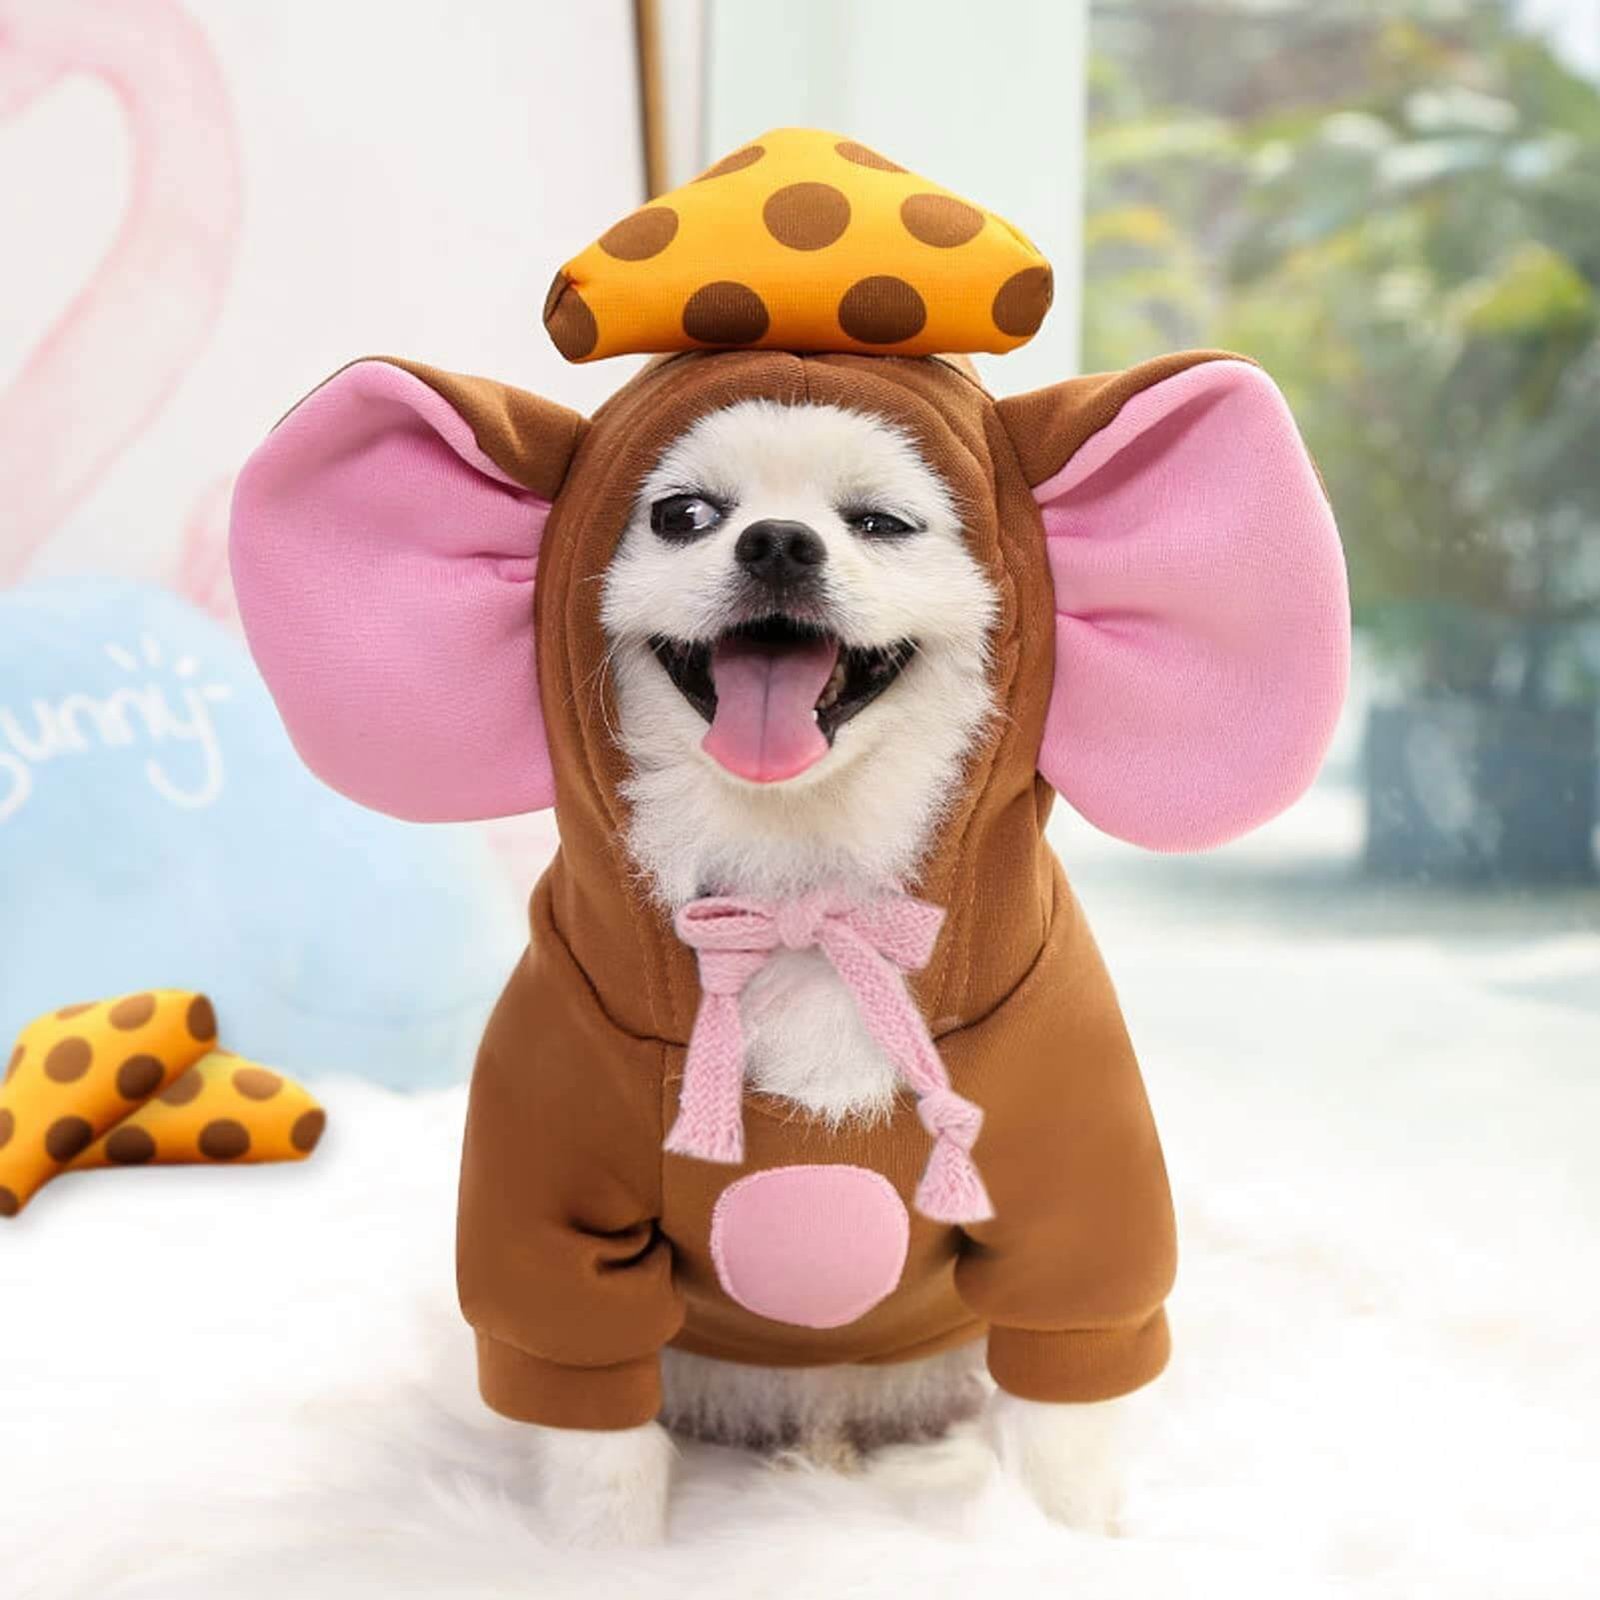 oversized ears for your dog's costume